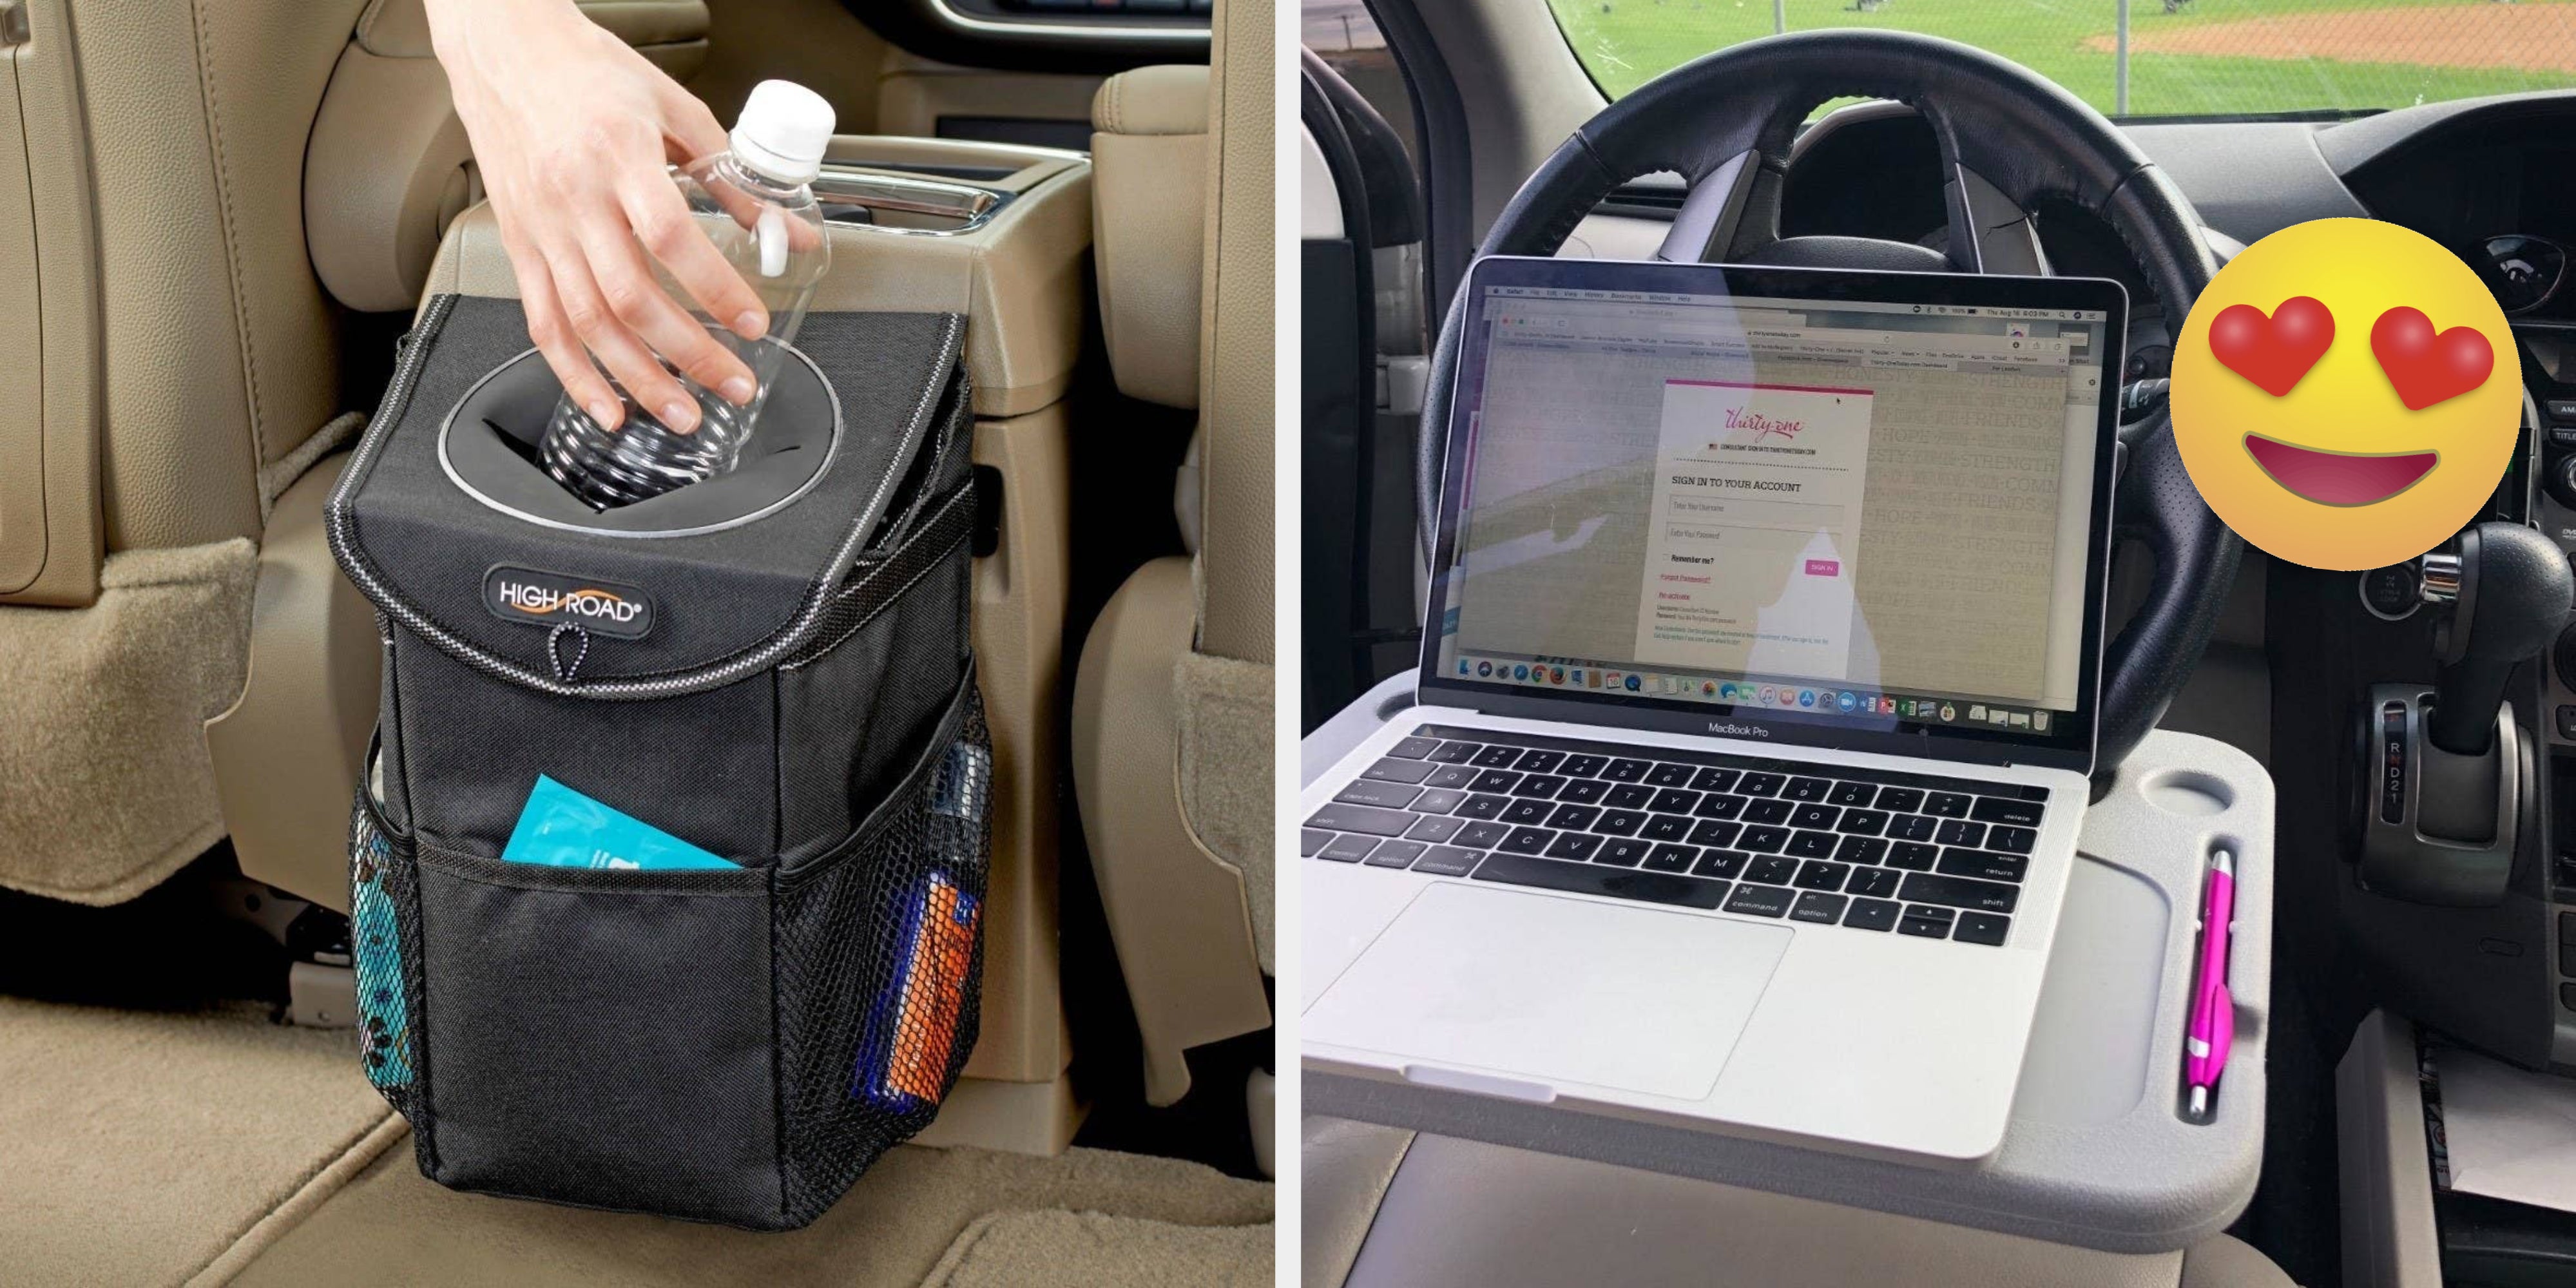 37 Cheap Products That'll Make Your Car So Much Better